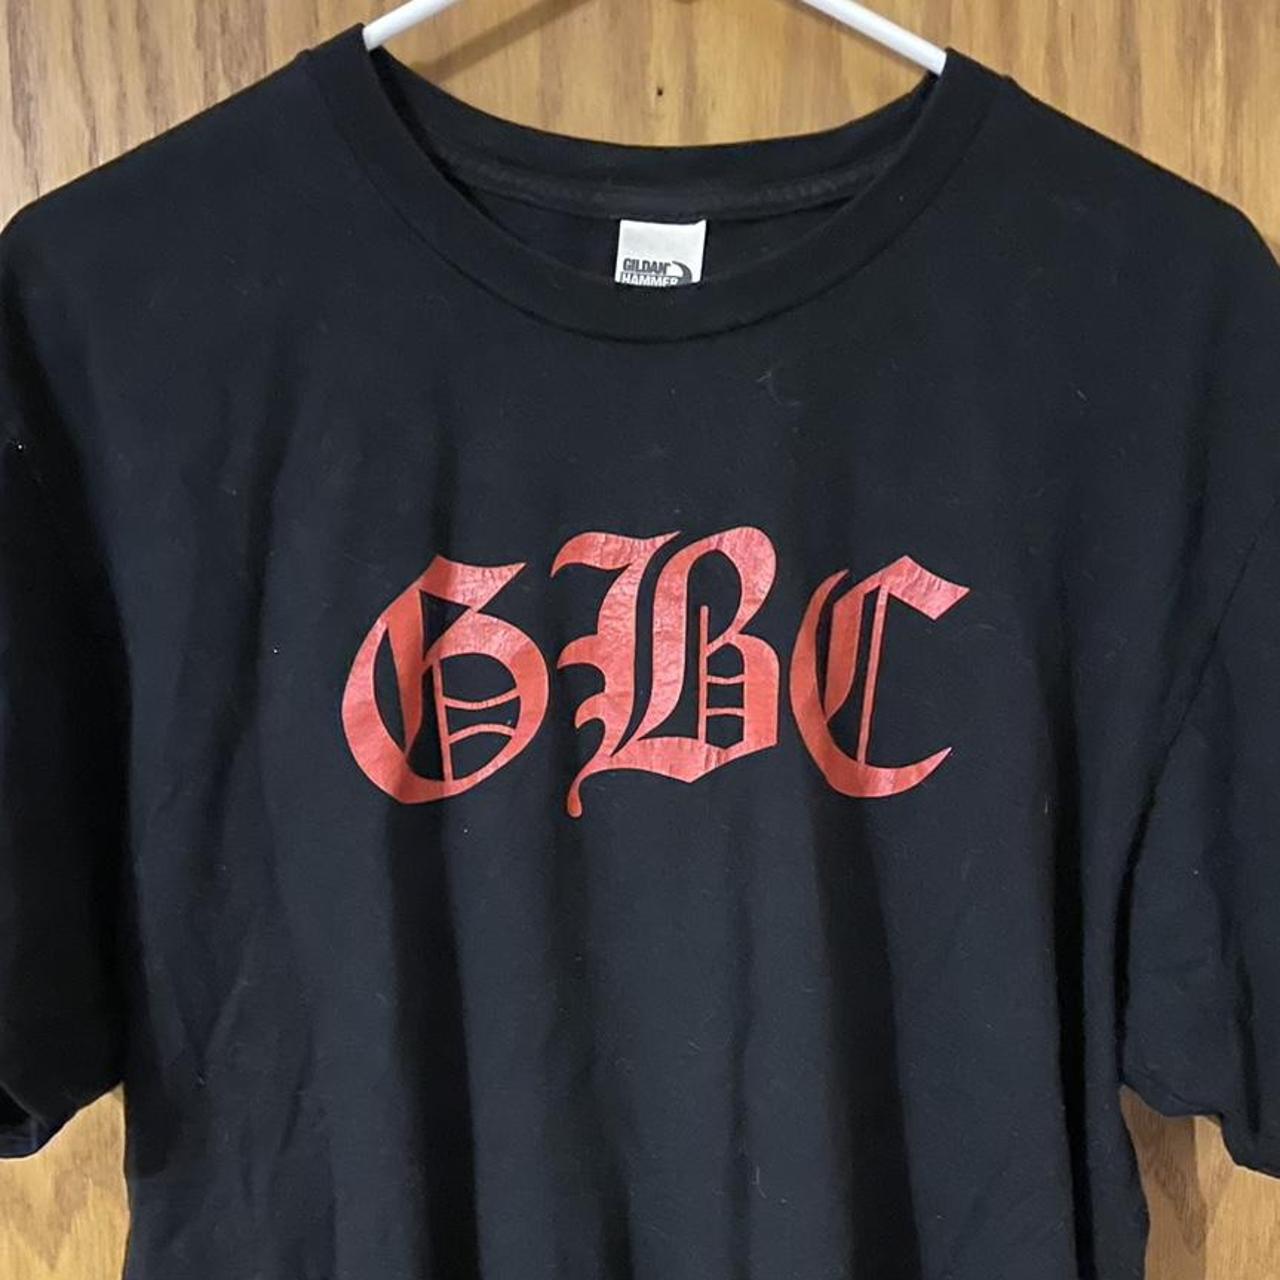 Gothboiclique gbc logo red variant sold at chicago... - Depop